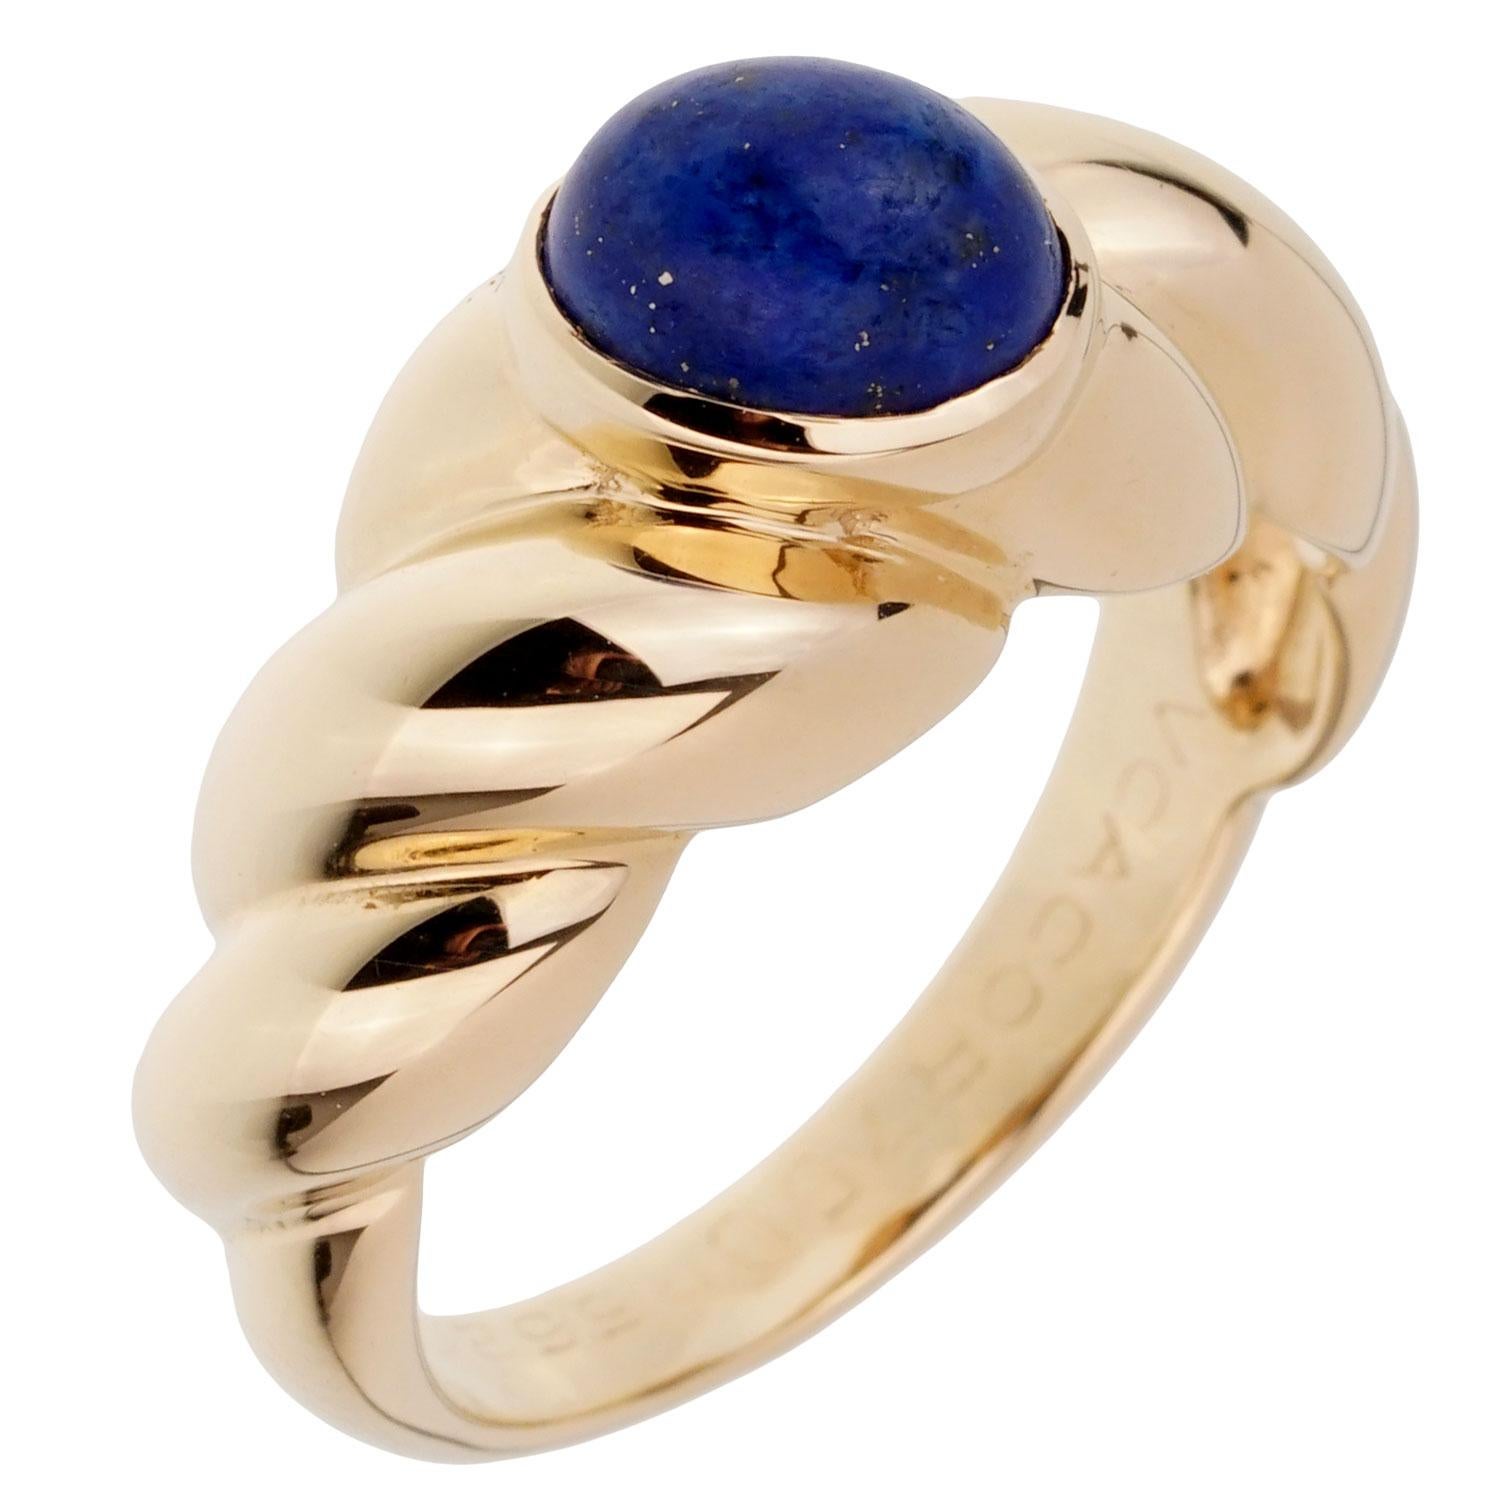 A fabulous vintage Van Cleef & Arpels ring set with a cabochon oval Lapis stone in 18k yellow gold. The ring measures a size 6 1/4 and can be resized.